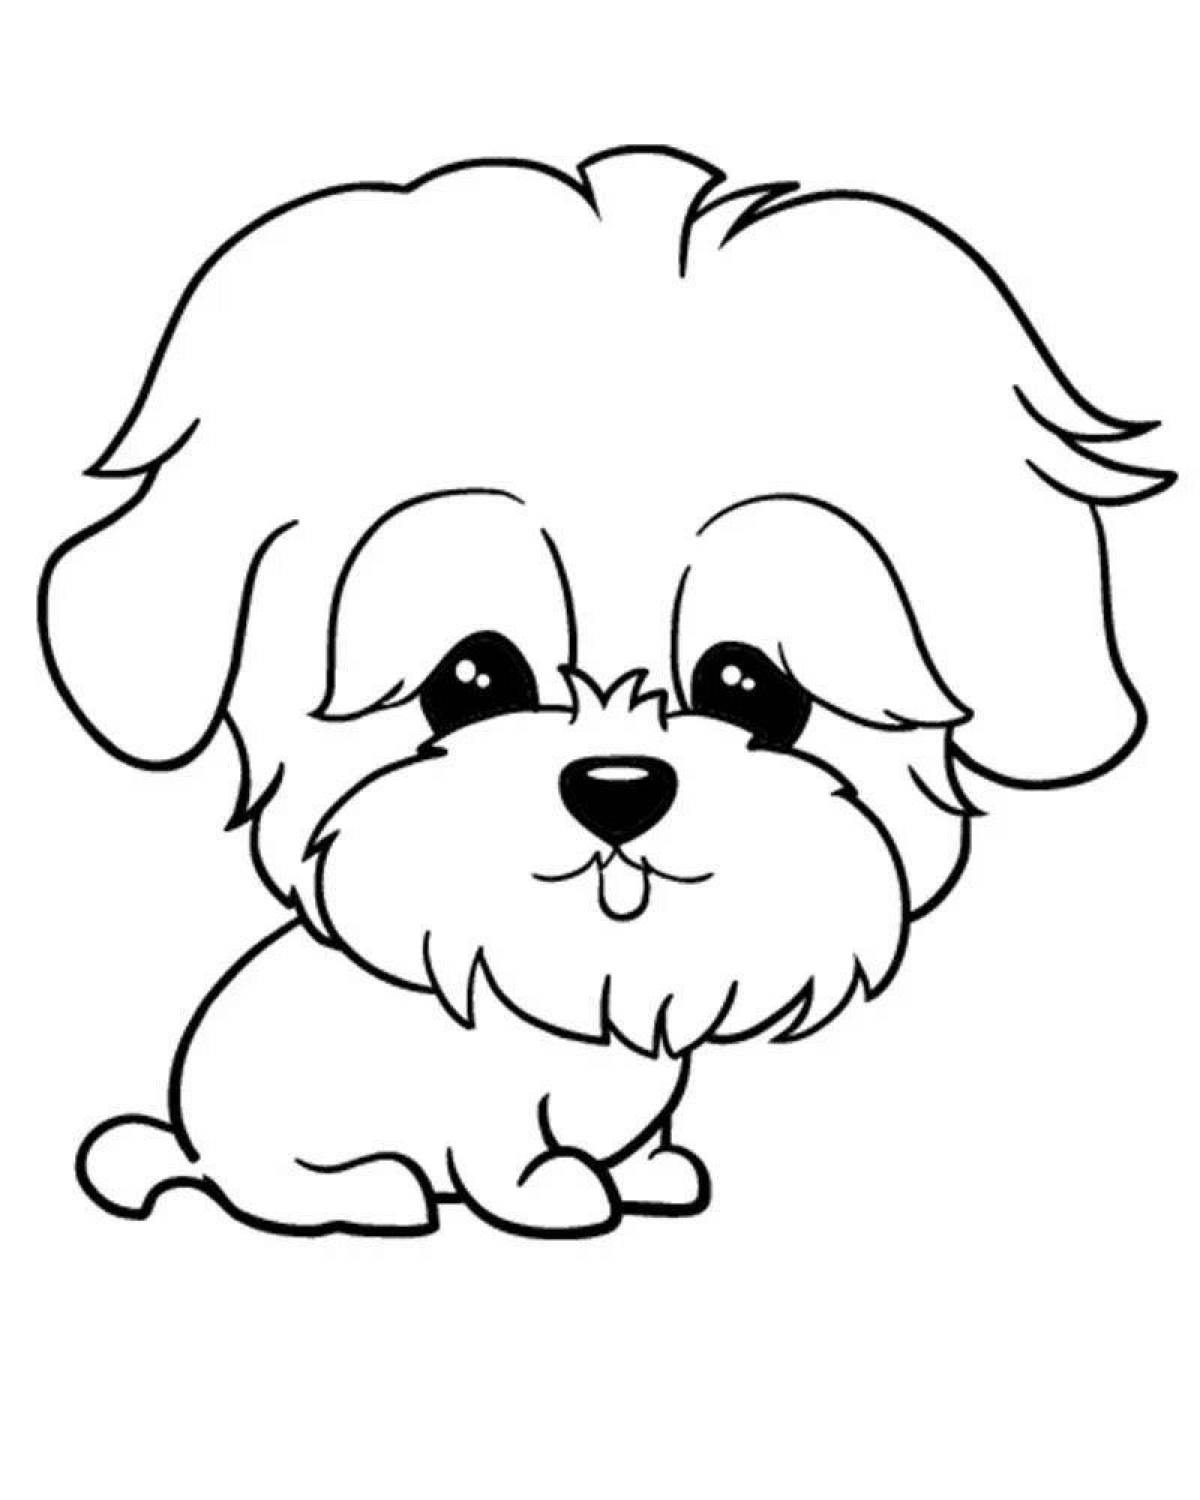 Coloring page funny cute puppy